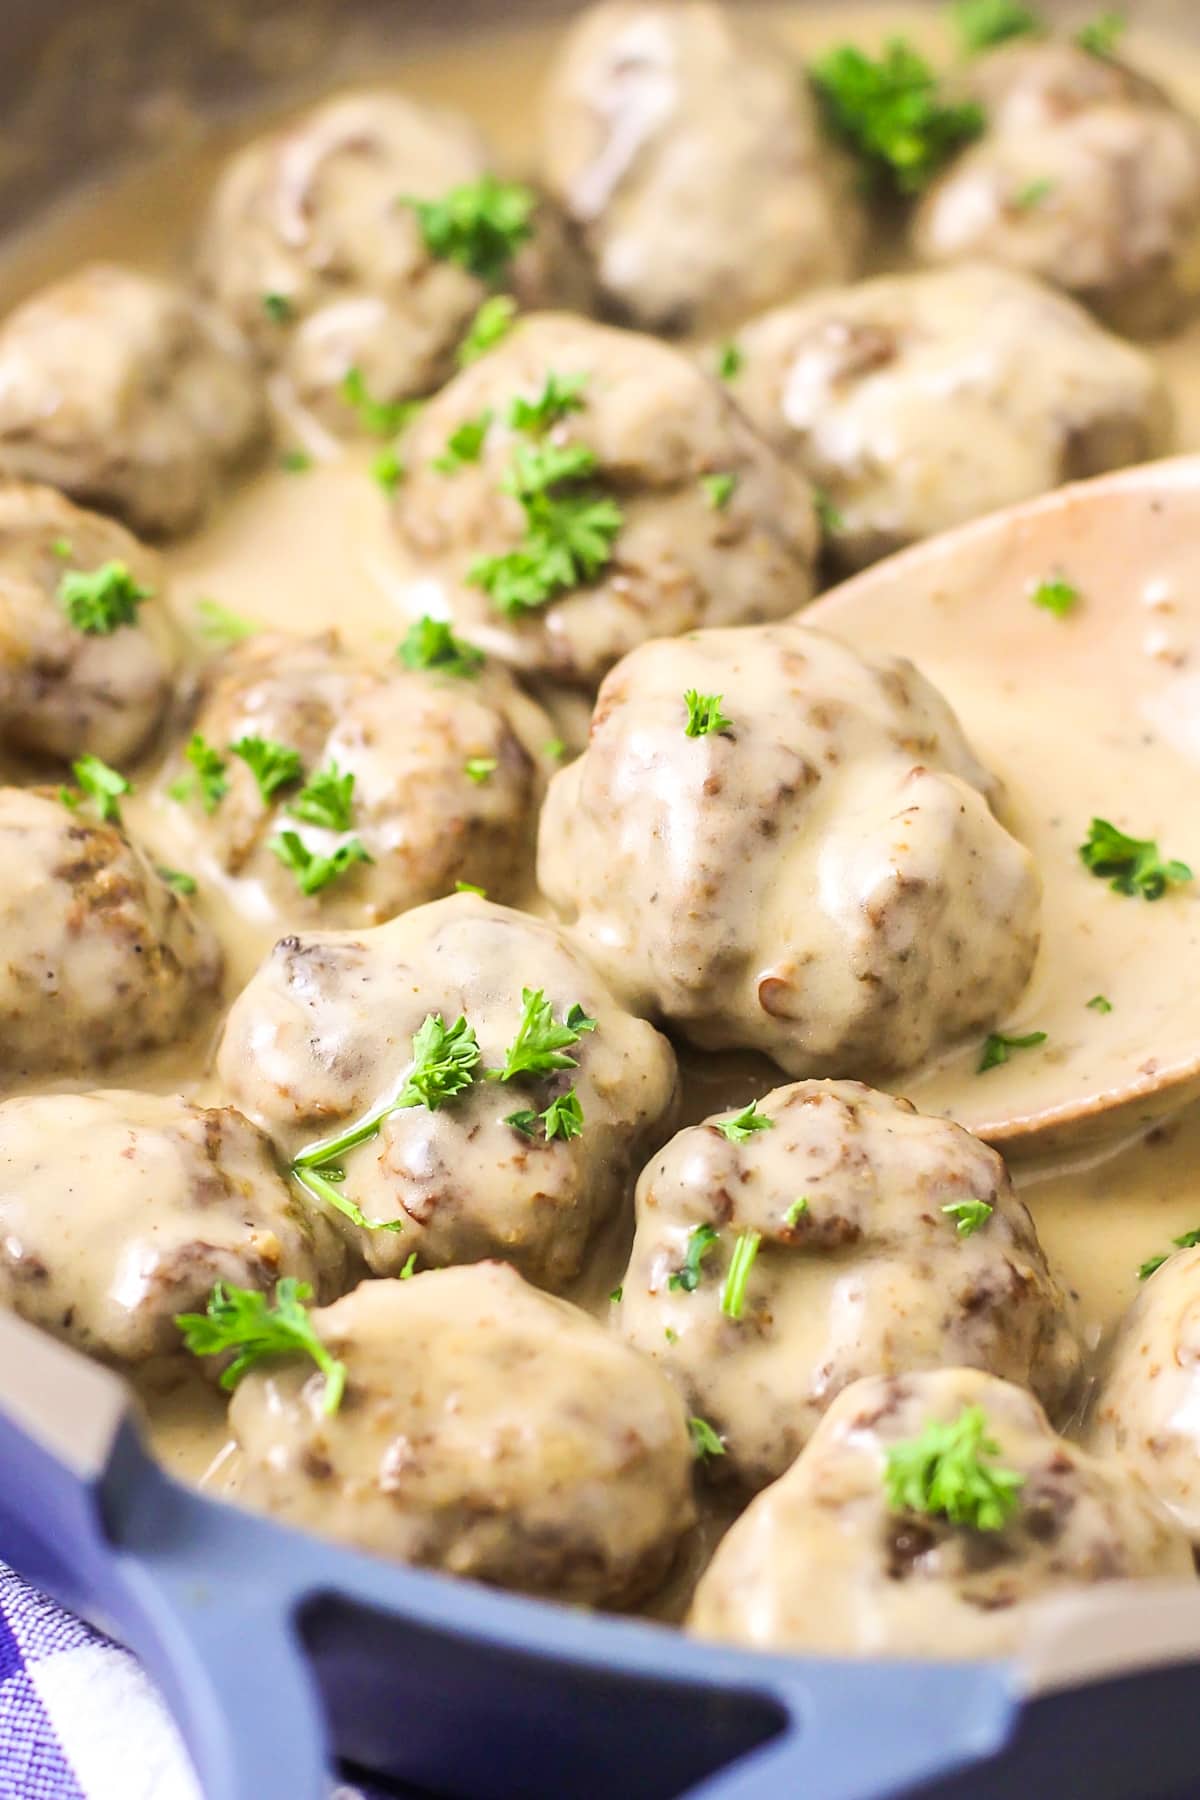 Swedish meatball recipe topped with parsley in sauce.